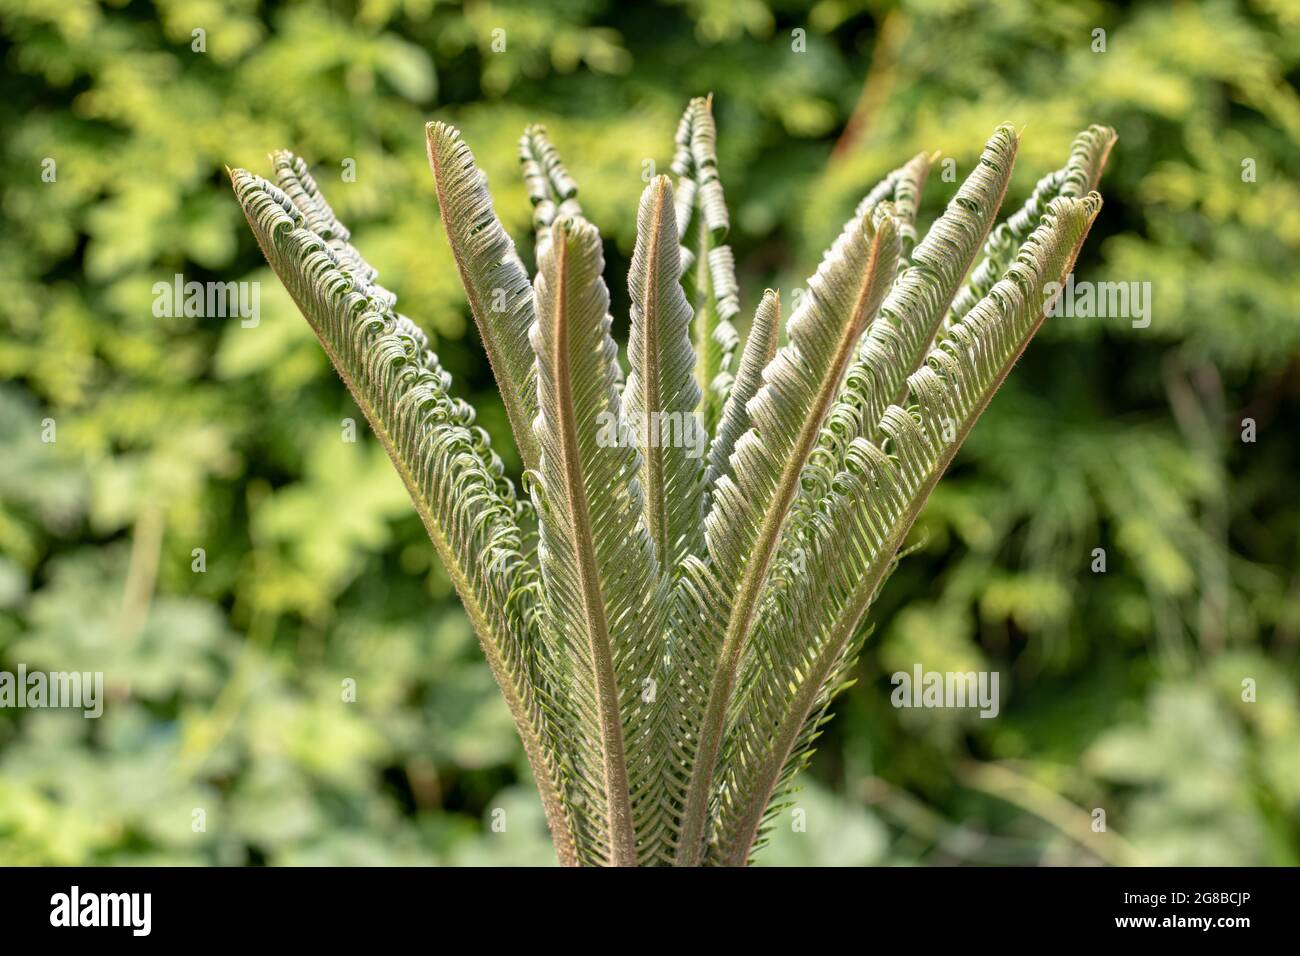 Palm background. Closeup of fresh green leaves of a japanese Sago palm tree (Cycas revoluta) over blurred natural green background. The new leaves are Stock Photo